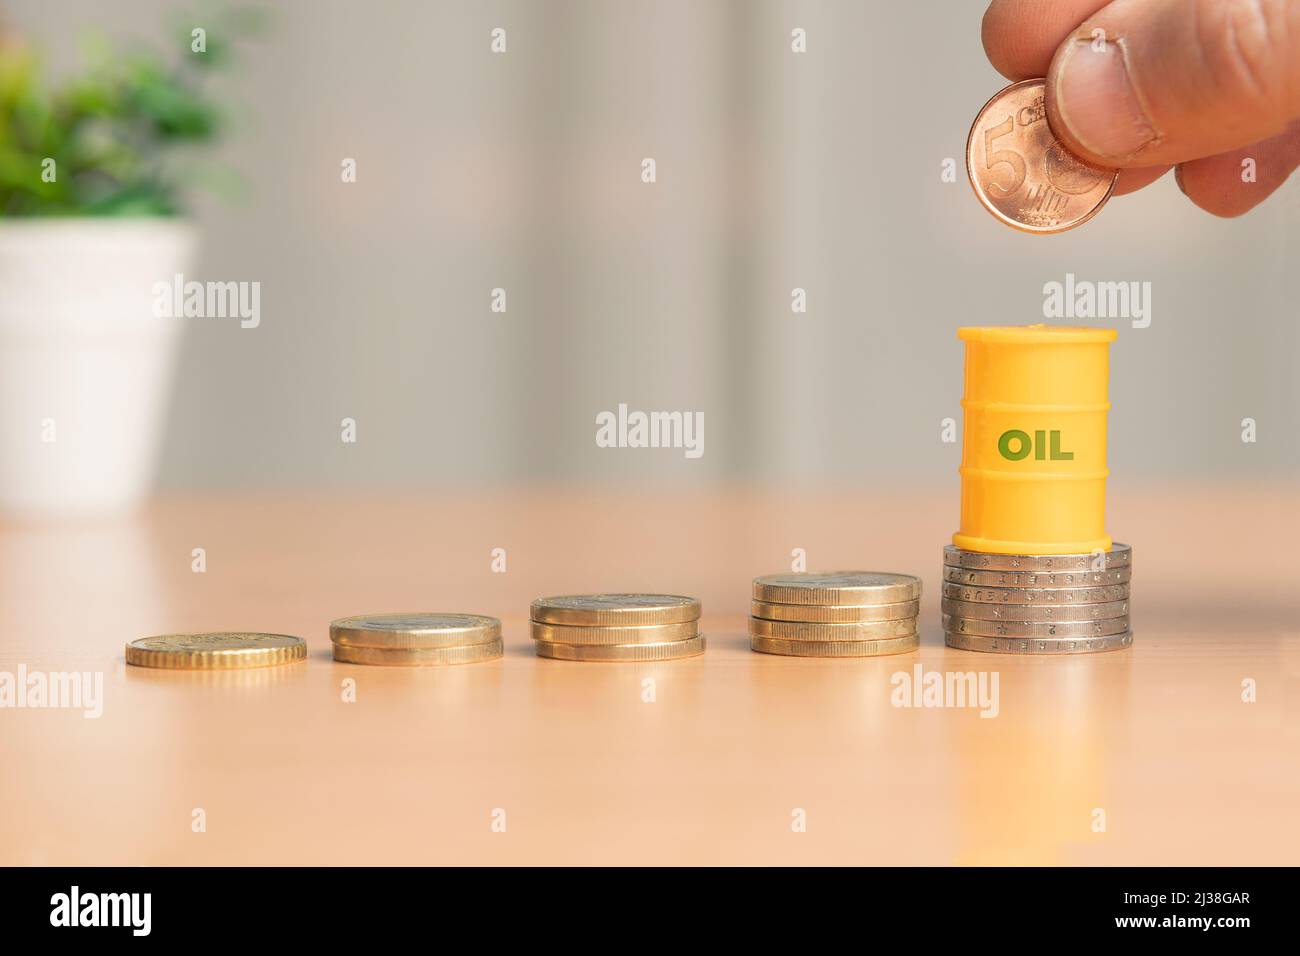 Oil price increase concept: oil barrel over a stack of coins, shallow depth of field Stock Photo